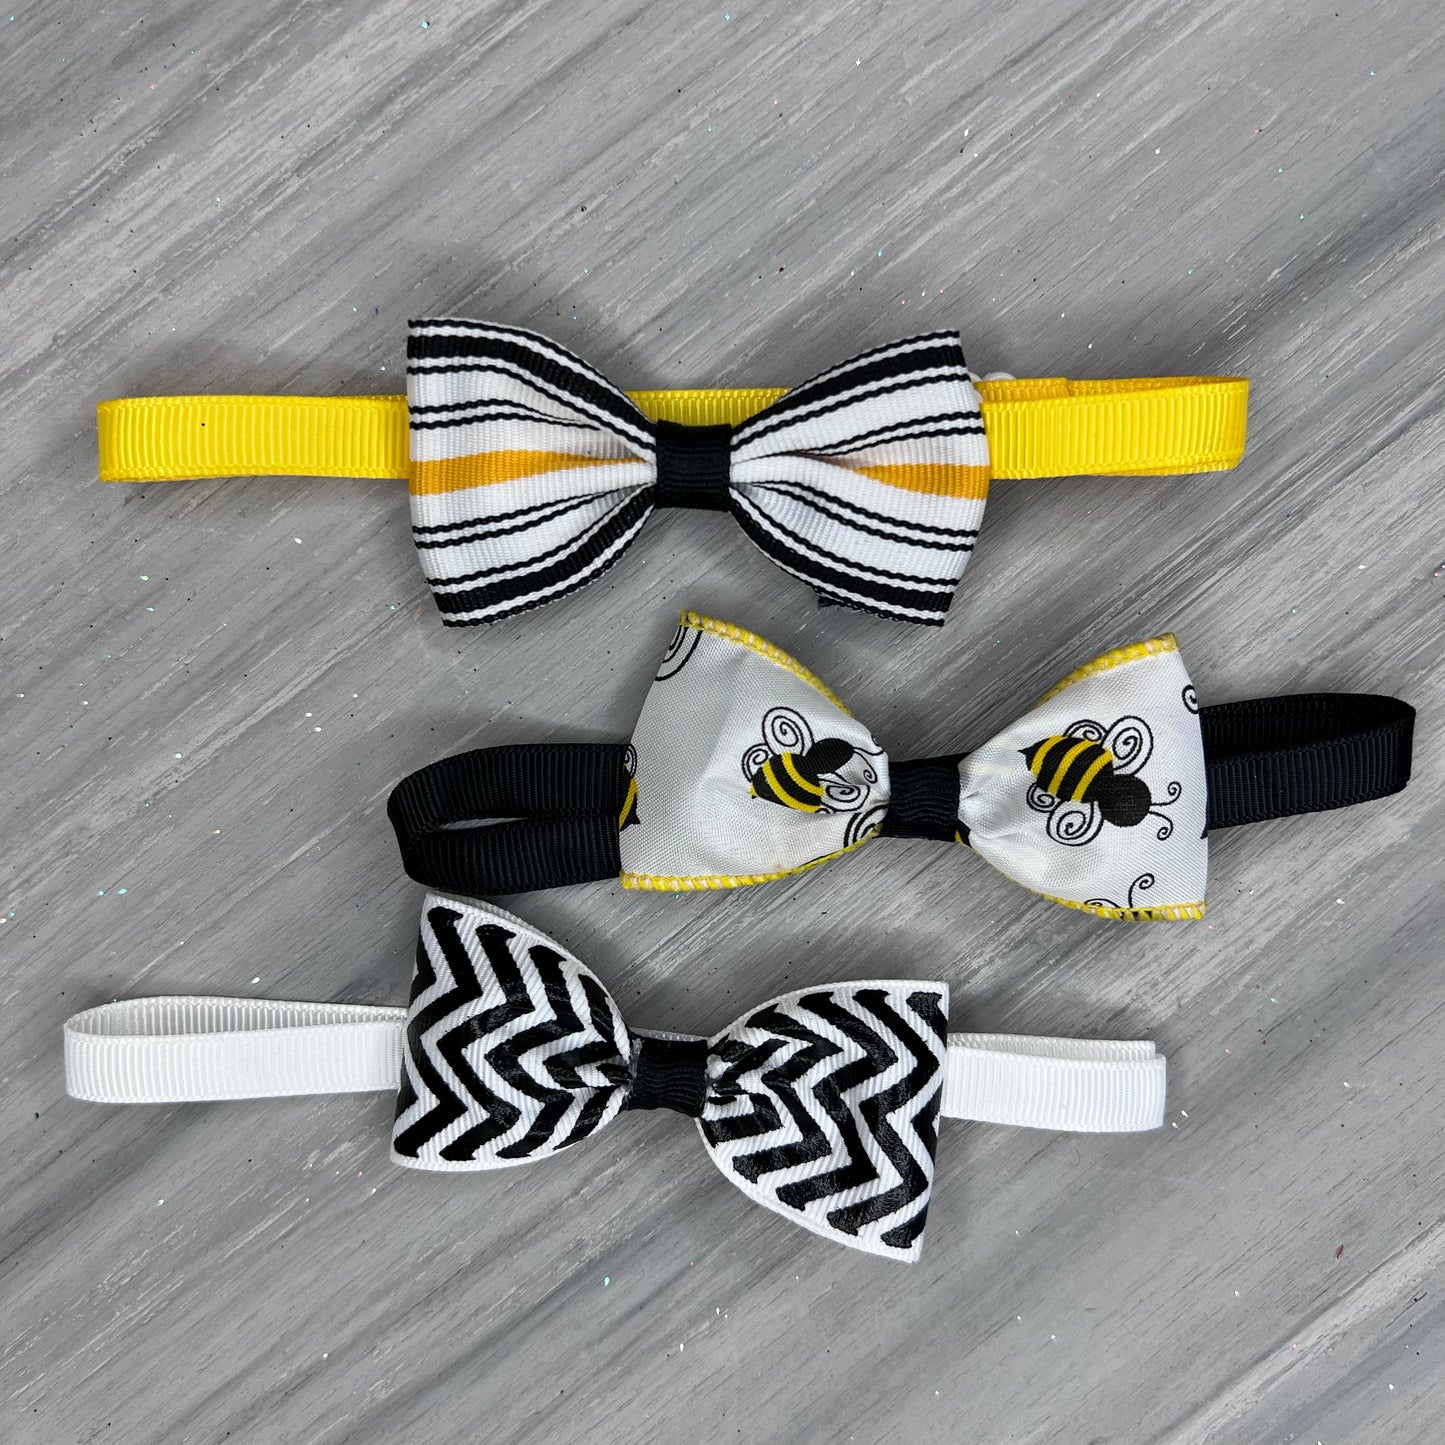 Save the Bees - 8 Adjustable Bow Tie Neckwear